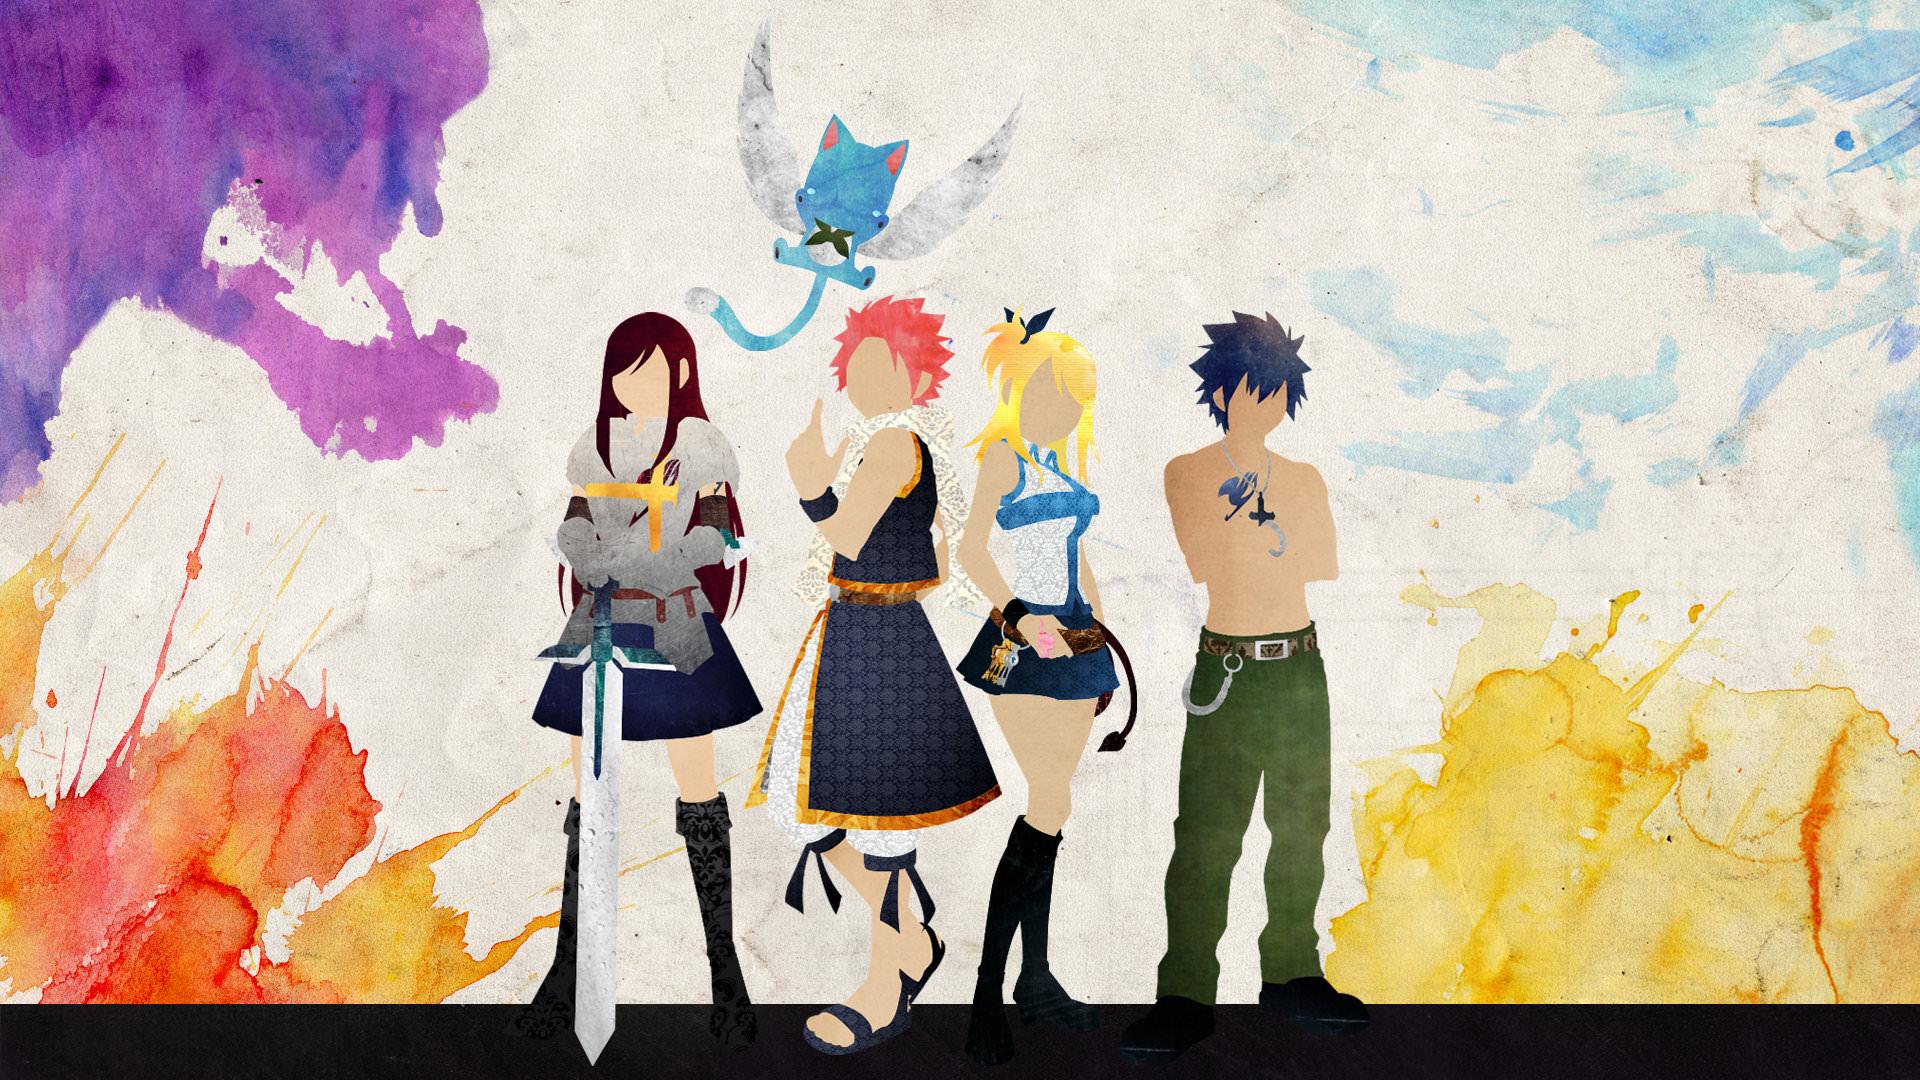 Best Fairy Tail wallpaper for High Resolution full HD 1080p